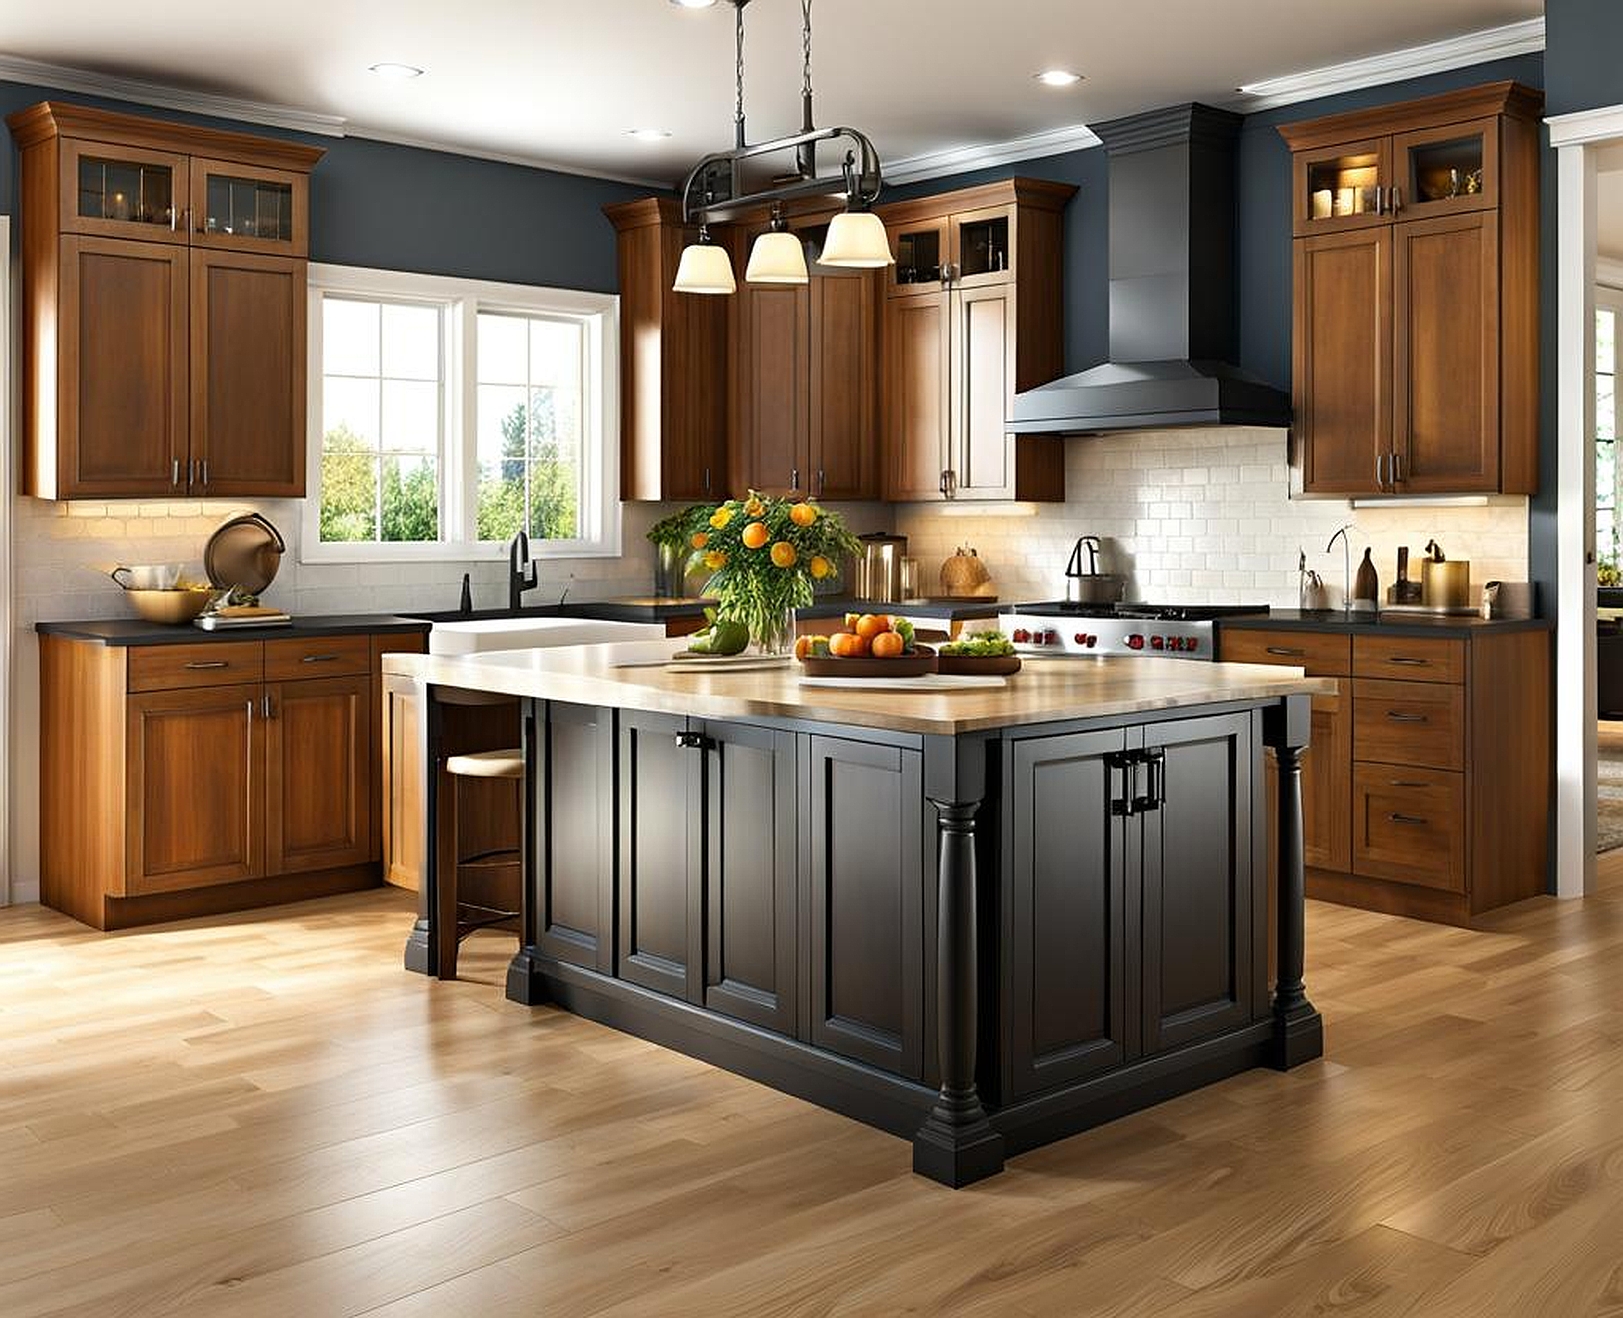 The Art of Creating an Ideal Kitchen Size and Layout for a Beautiful Home